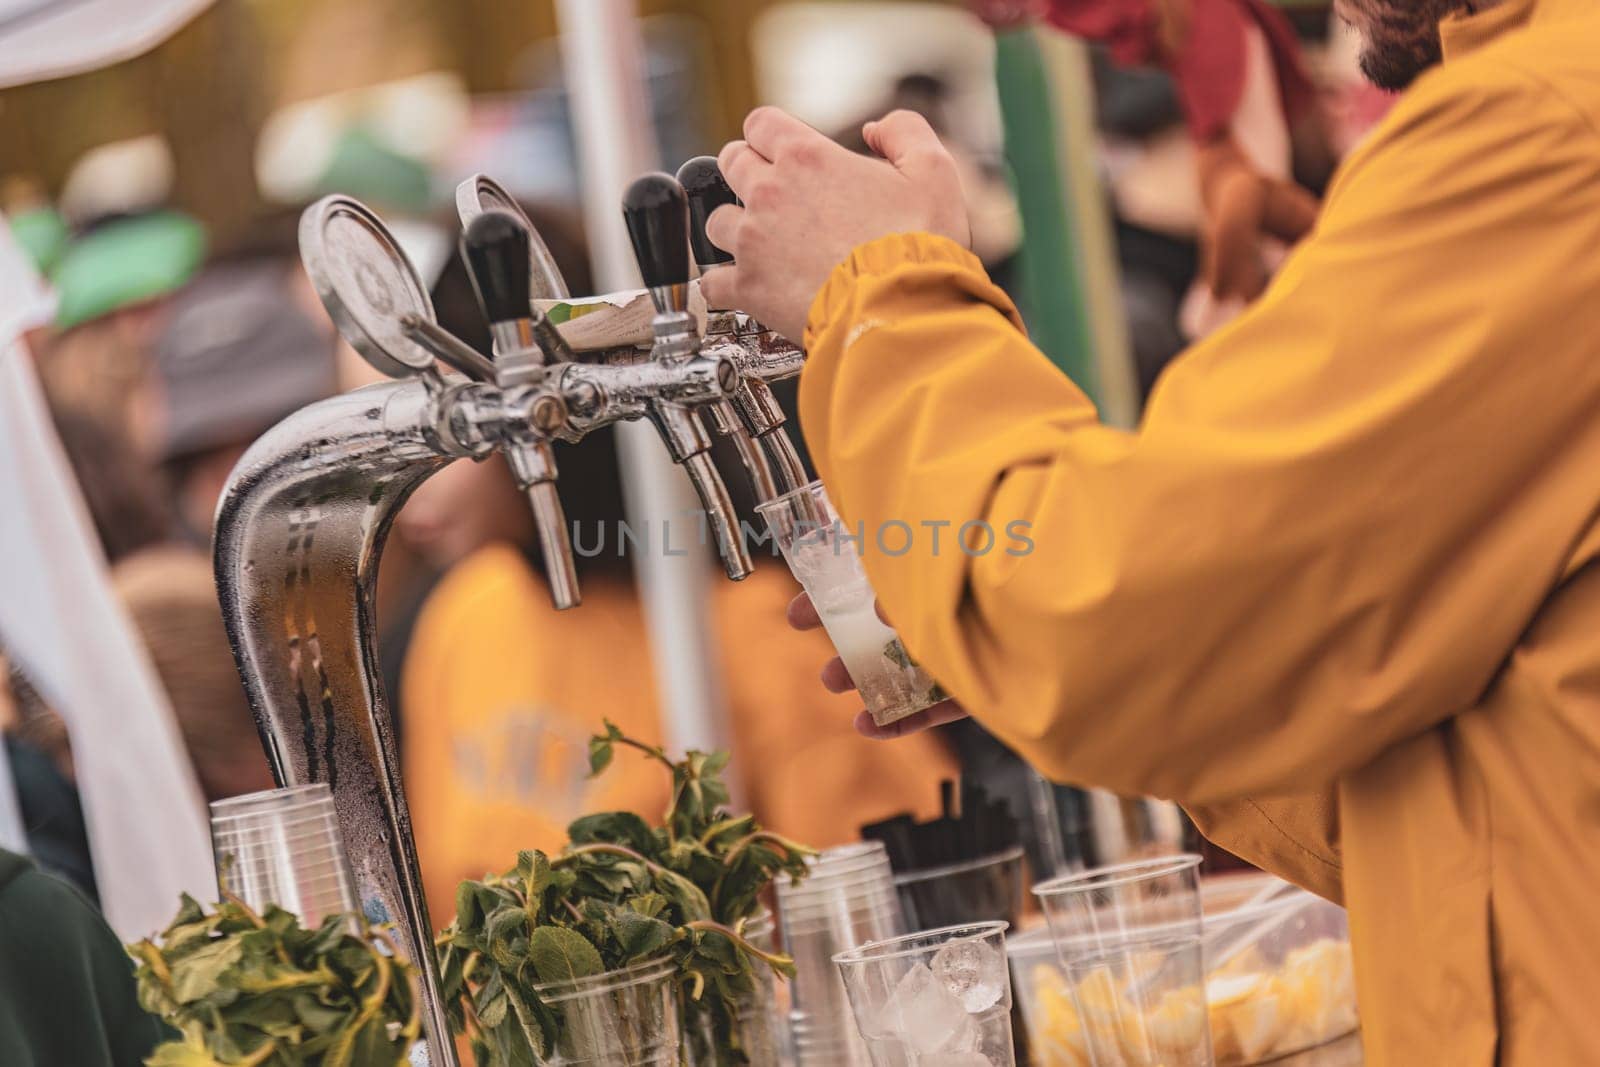 A hand expertly fills a glass with draft beer, capturing the perfect pour and frothy top in action.